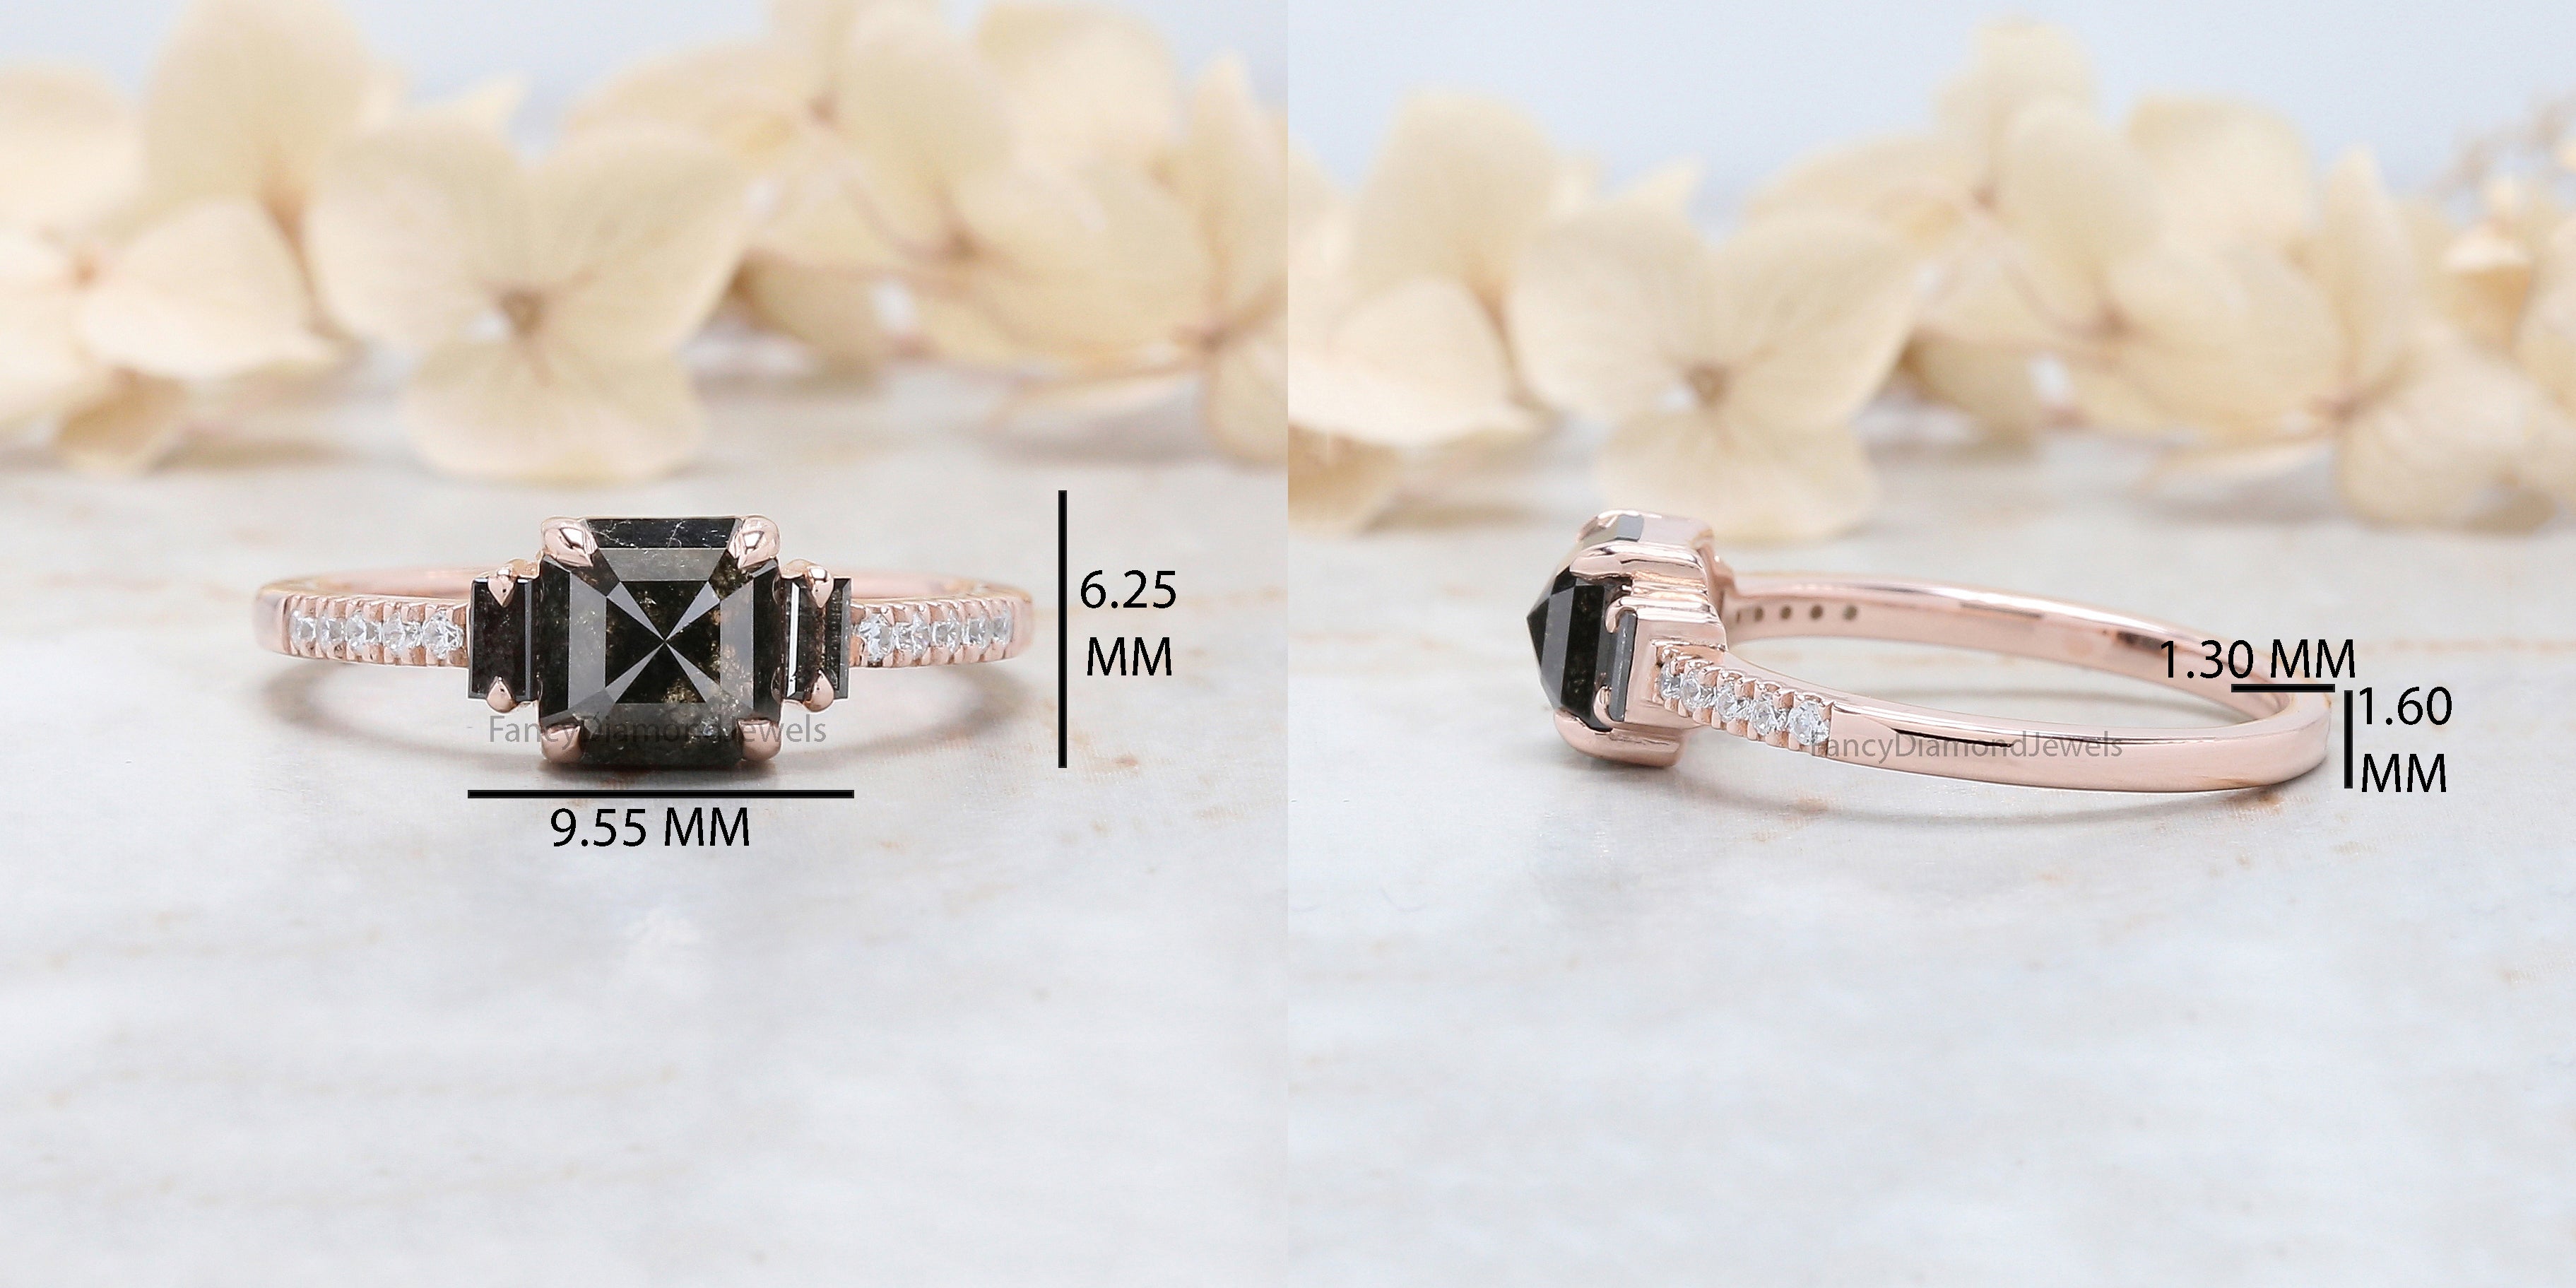 Emerald Cut Salt And Pepper Diamond Ring 1.04 Ct 5.85 MM Emerald Diamond Ring 14K Solid Rose Gold Silver Engagement Ring Gift For Her QK1942